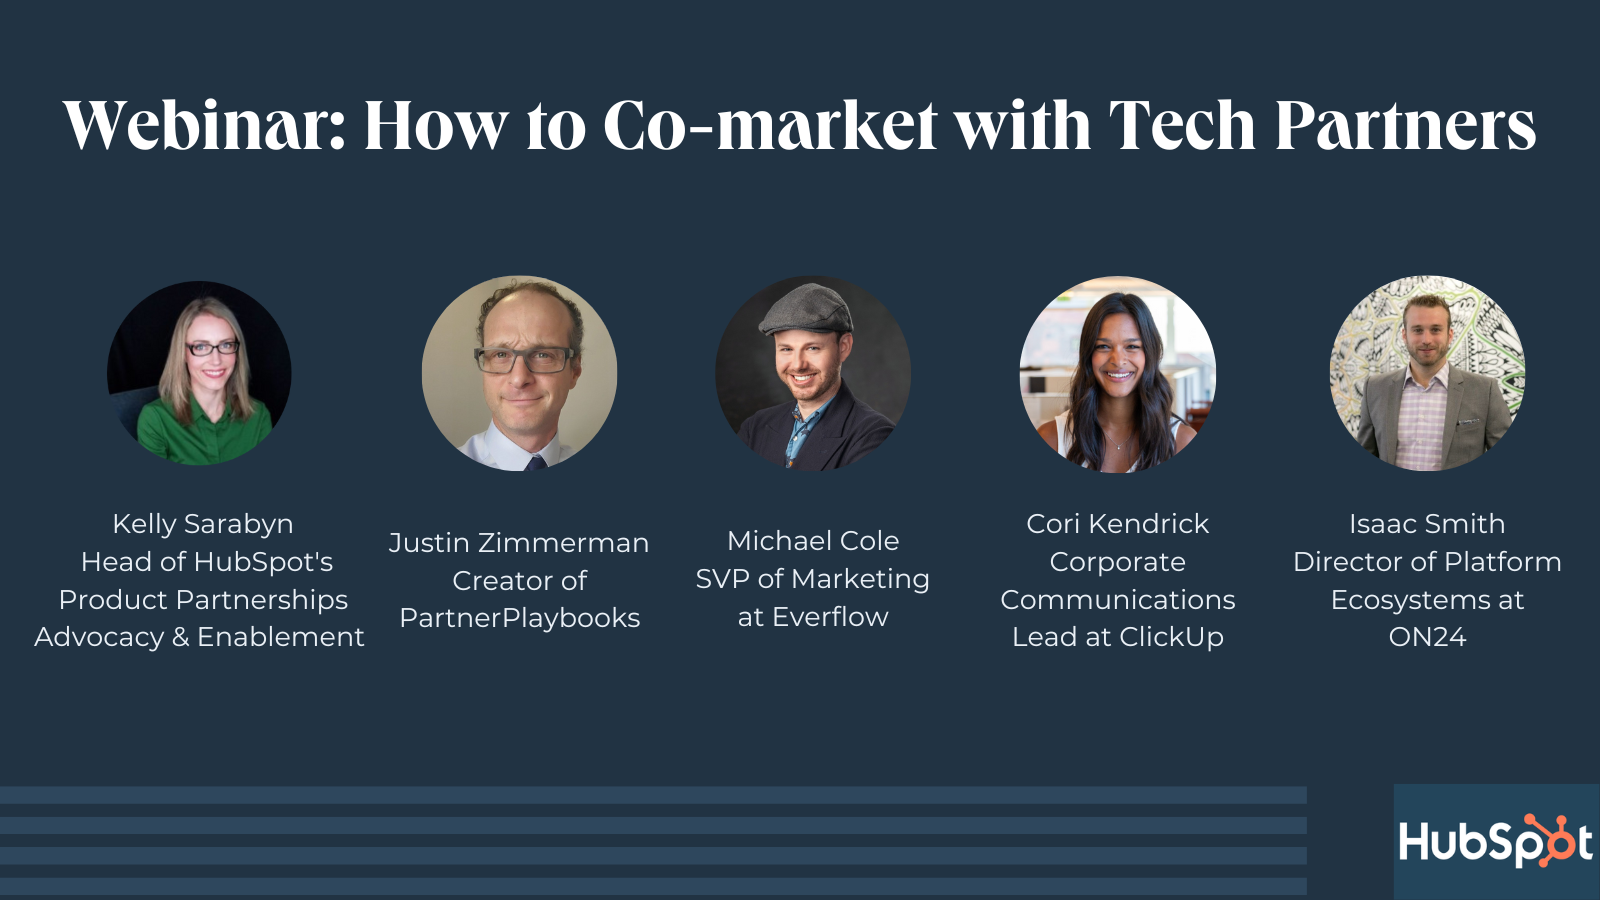 How To Co-Market With Tech Partners (Attract, Qualify, Build Projects, And Track Results)